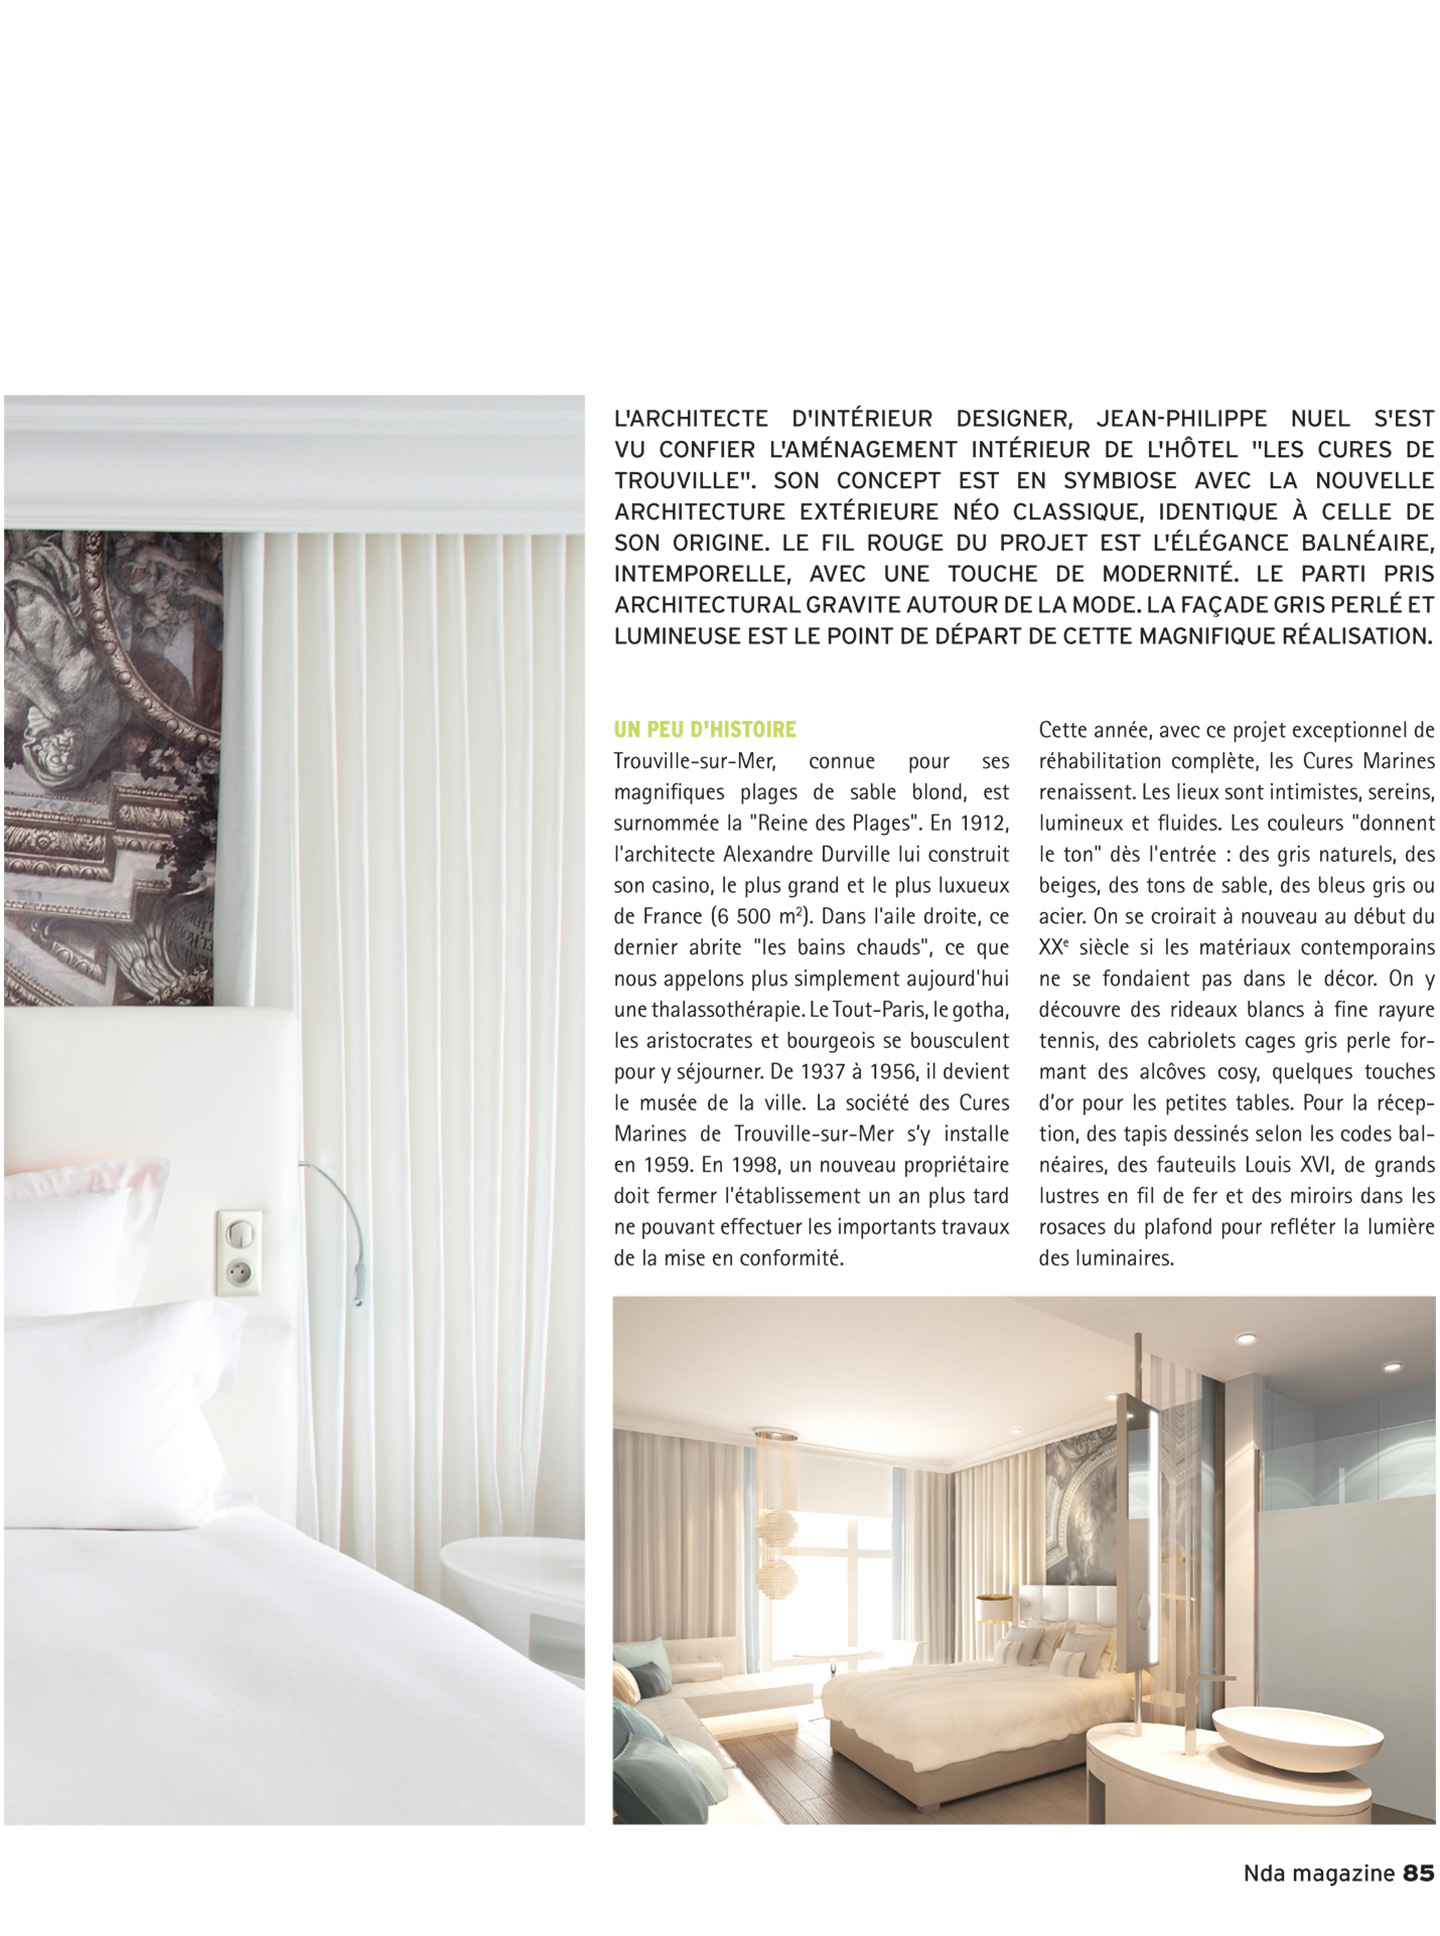 article on the cures marines de trouville in nda magazine, 5 star luxury hotel and spa designed by the interior design studio jean-philippe nuel